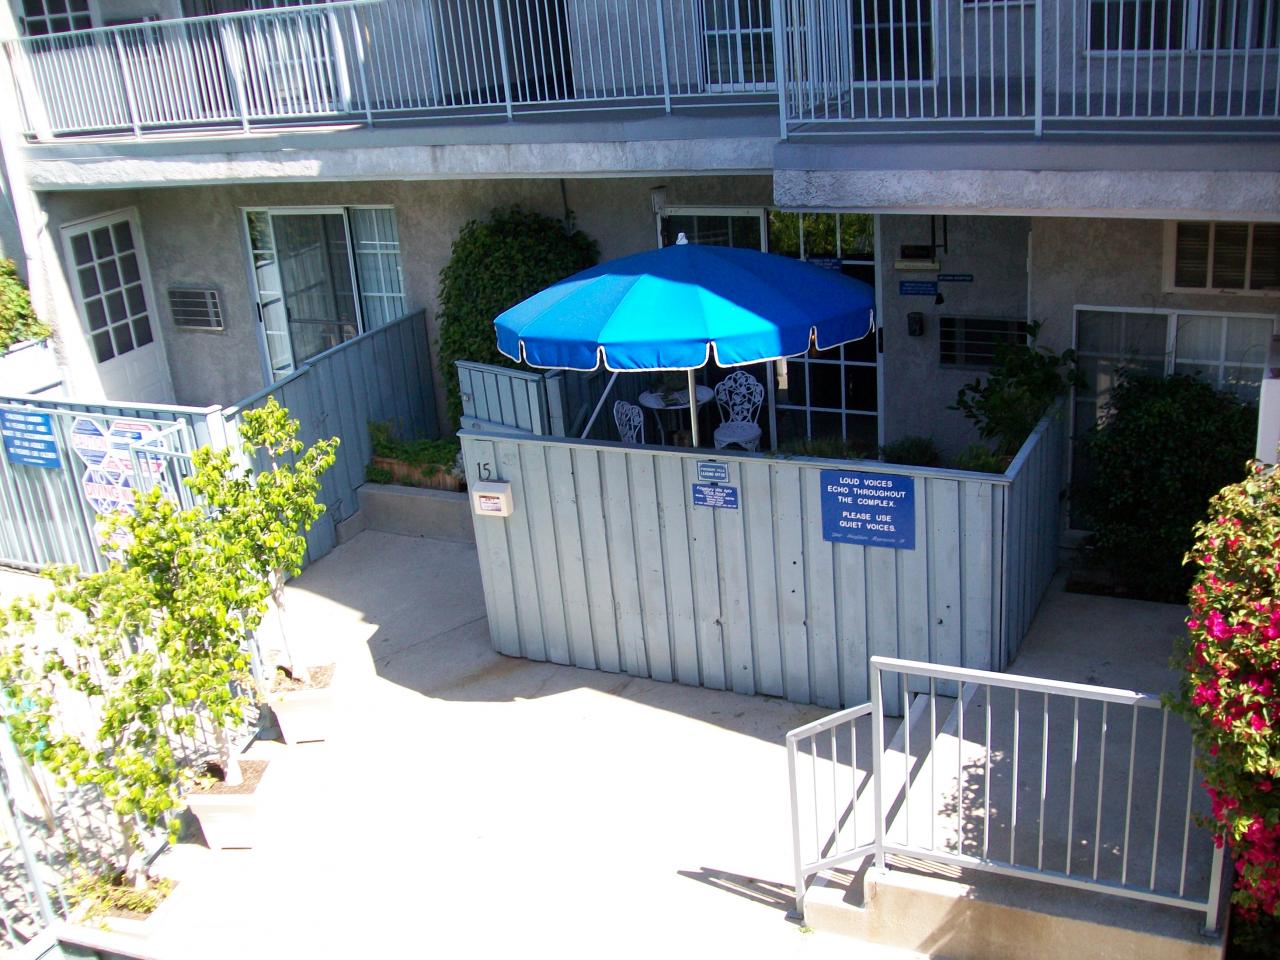 Photo of Kingsbury Villas Apartments - a view of some patios